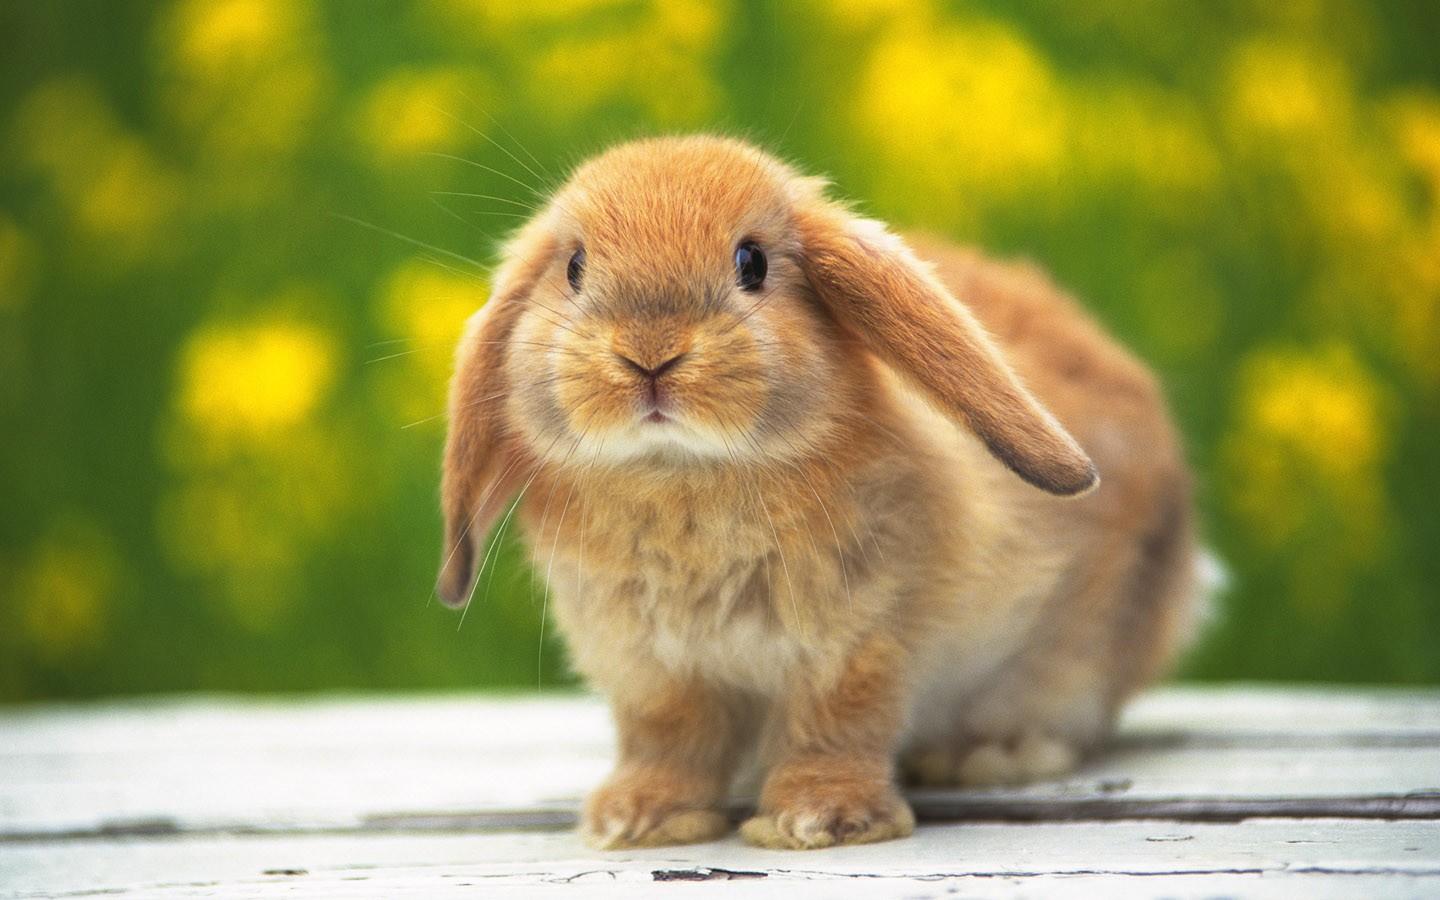 All Wallpapers Cute Rabbit hd Wallpapers 2013